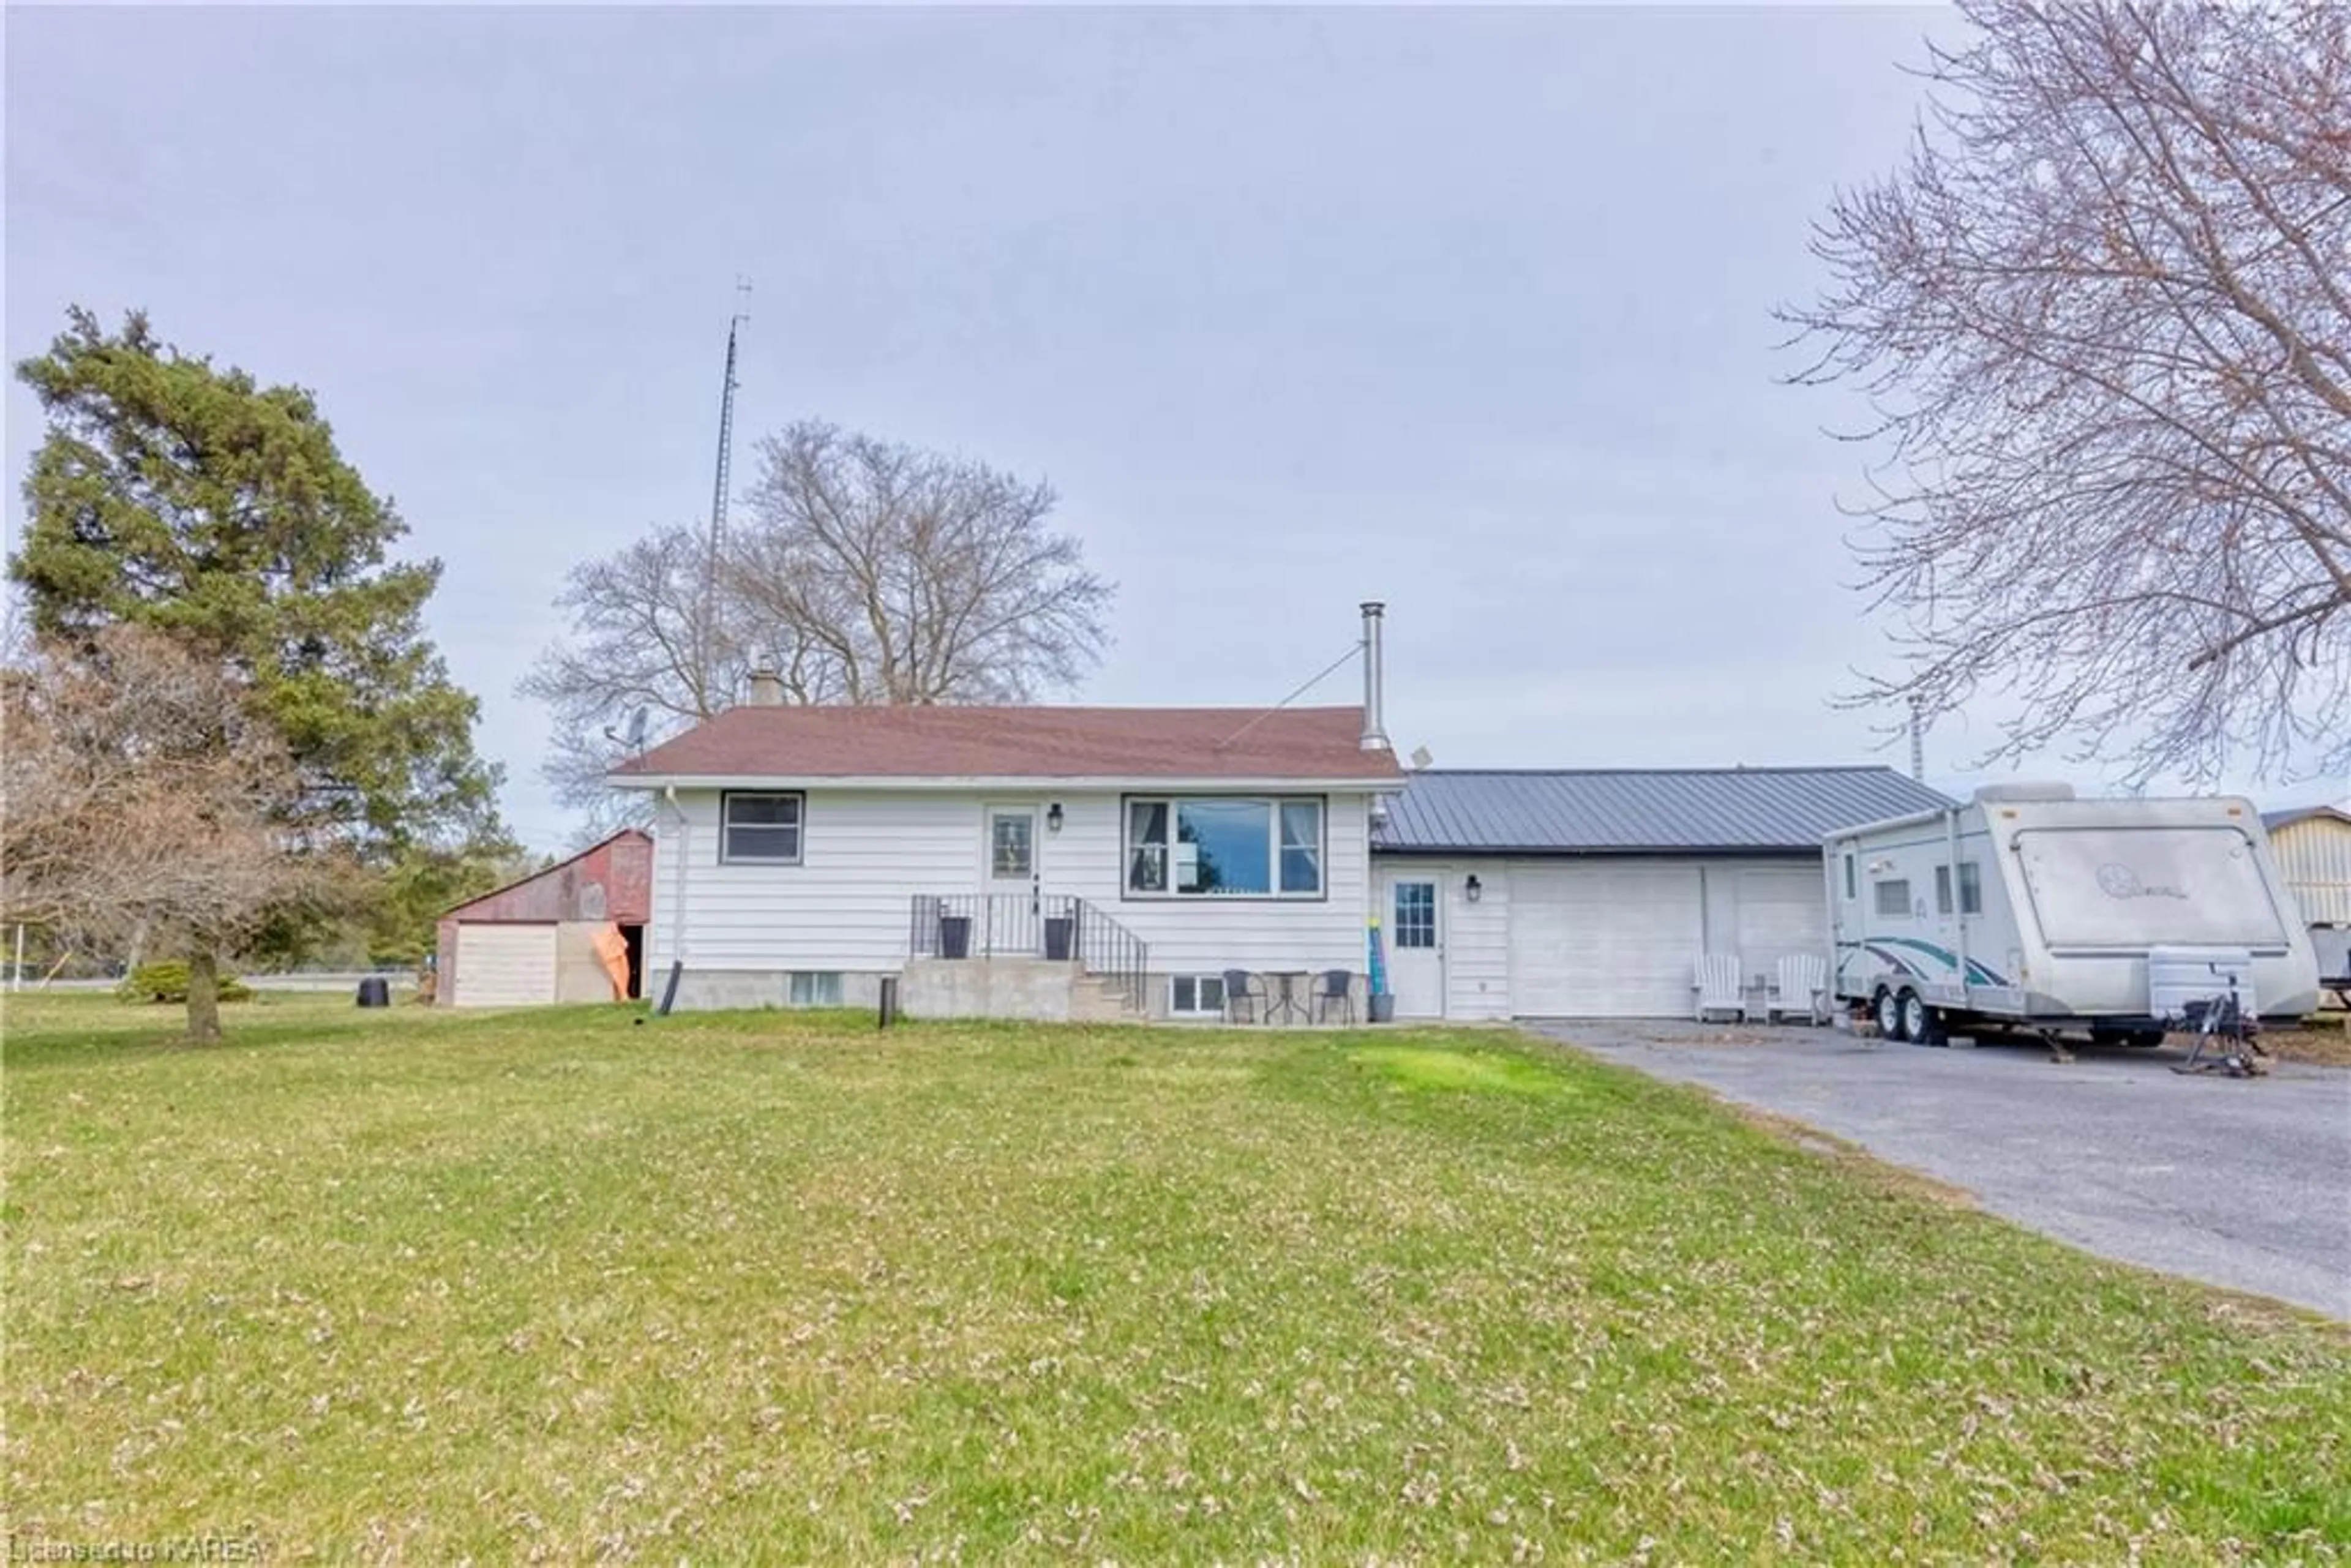 Frontside or backside of a home for 5458 County 8 Rd, Napanee Ontario K7R 3K7